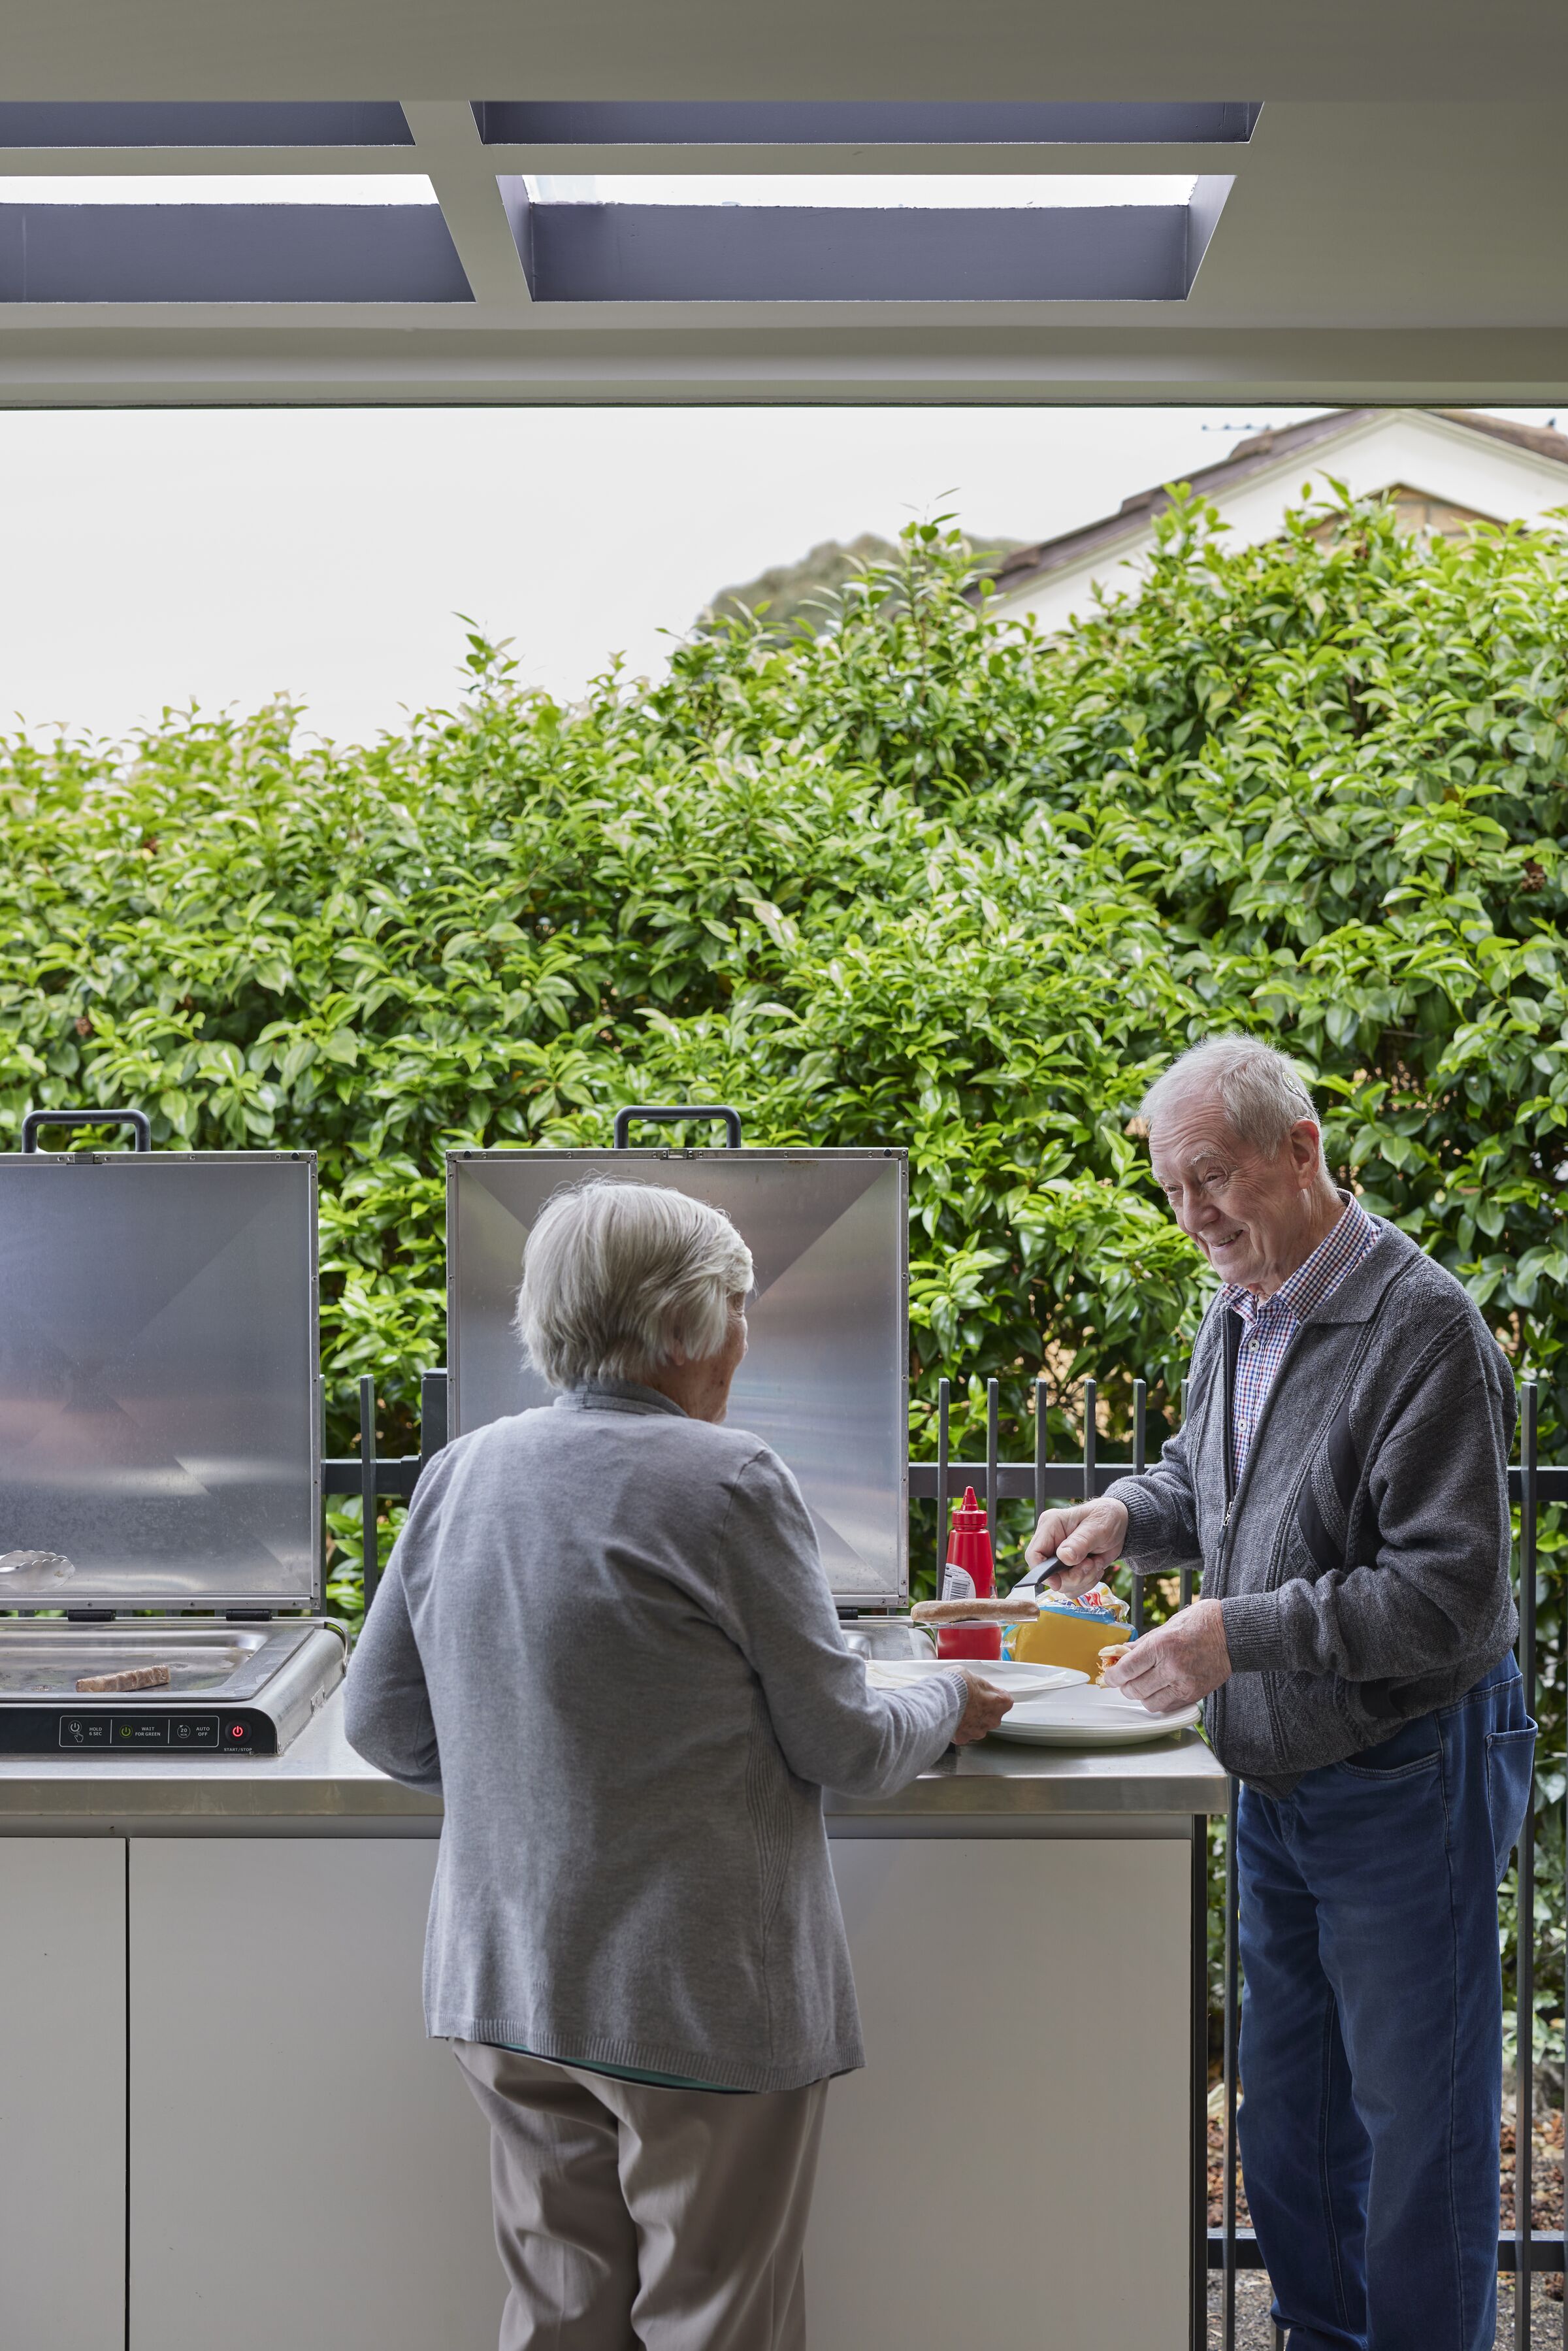 Viewbank Gardens residents chatting over a BBQ V2